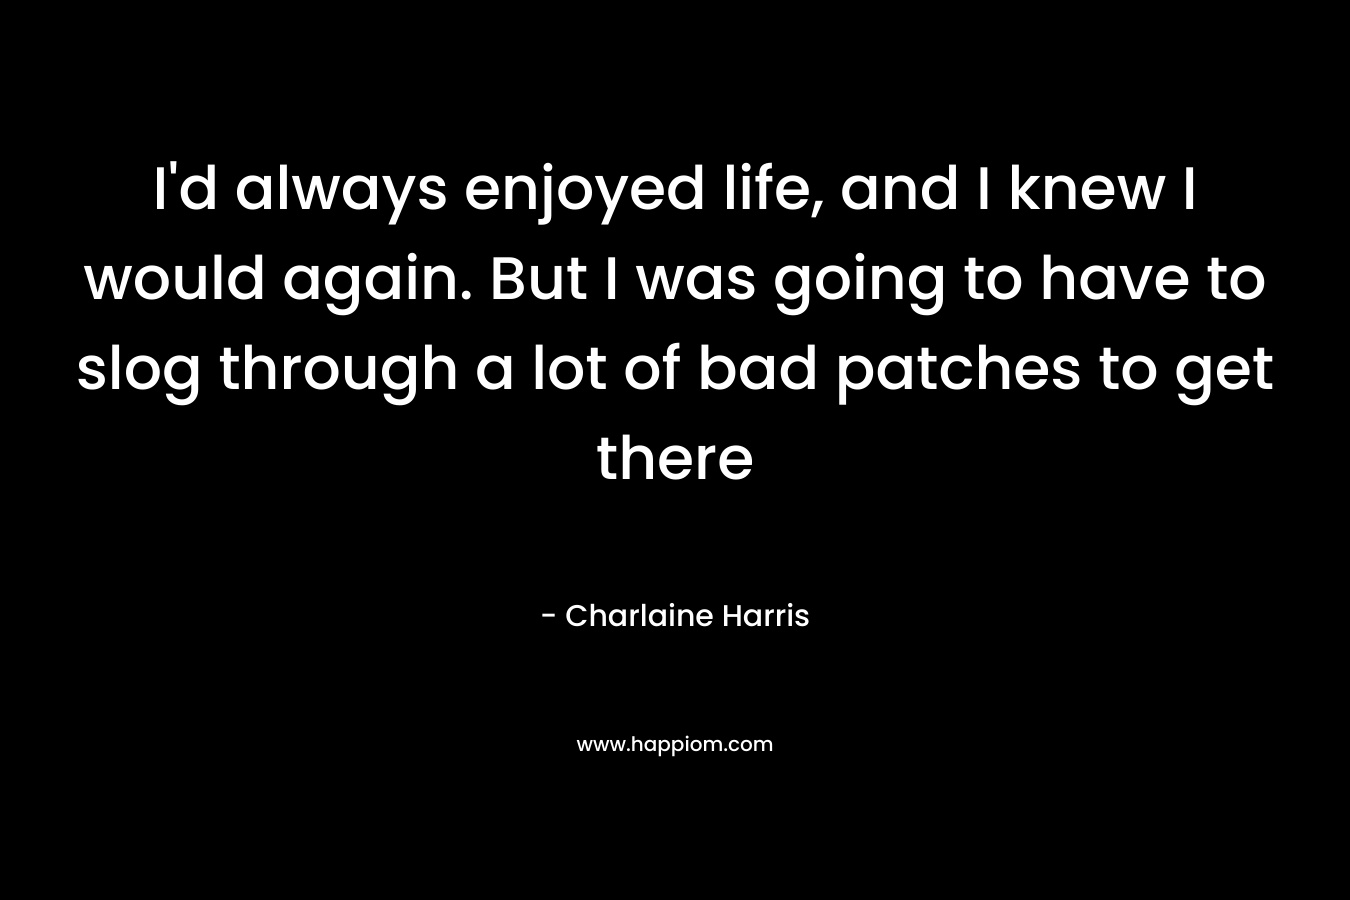 I'd always enjoyed life, and I knew I would again. But I was going to have to slog through a lot of bad patches to get there